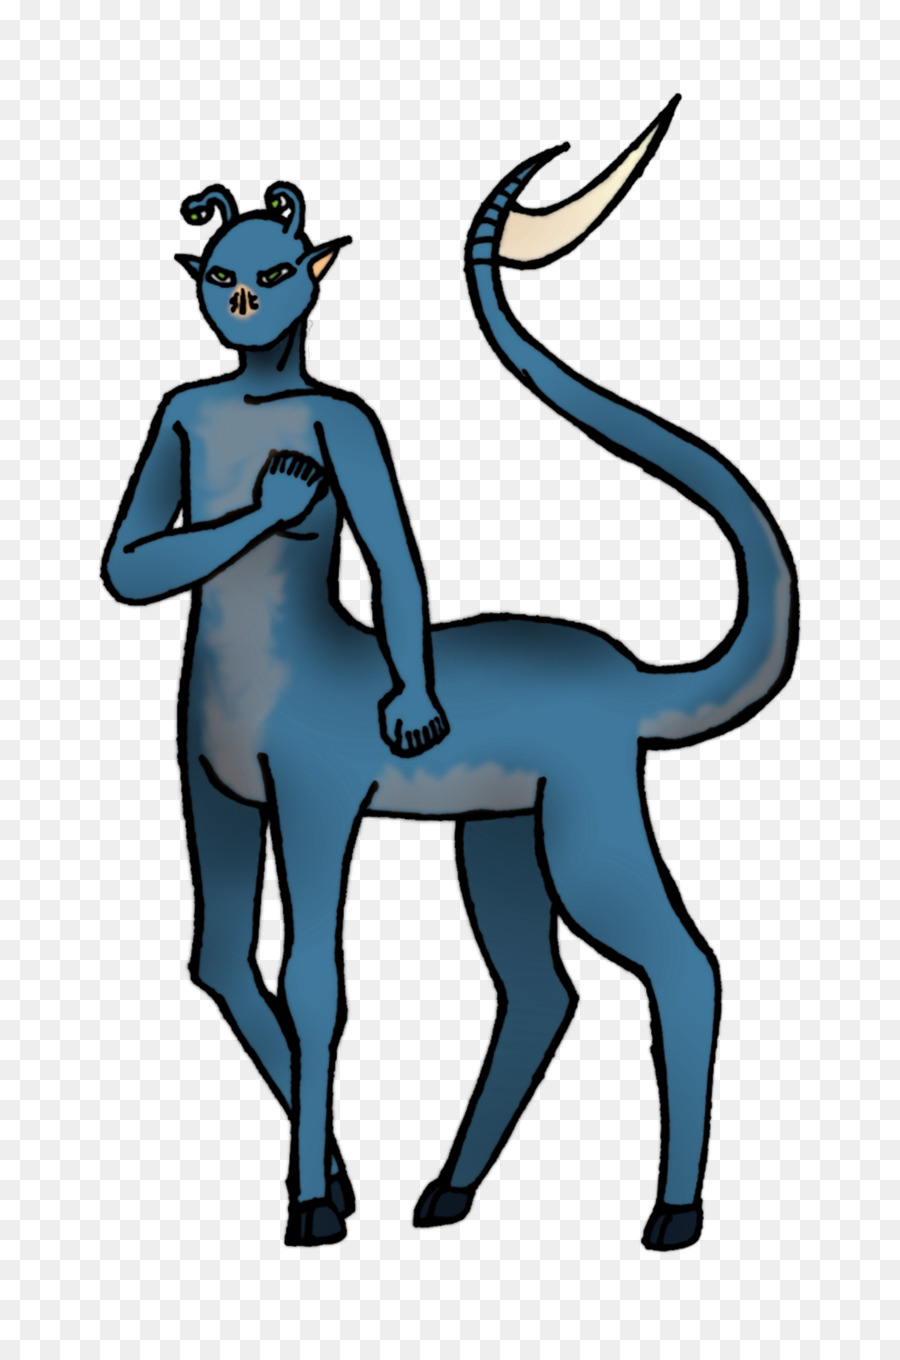 Aximiliesgarrouthisthill，Animorphs سلسلة PNG